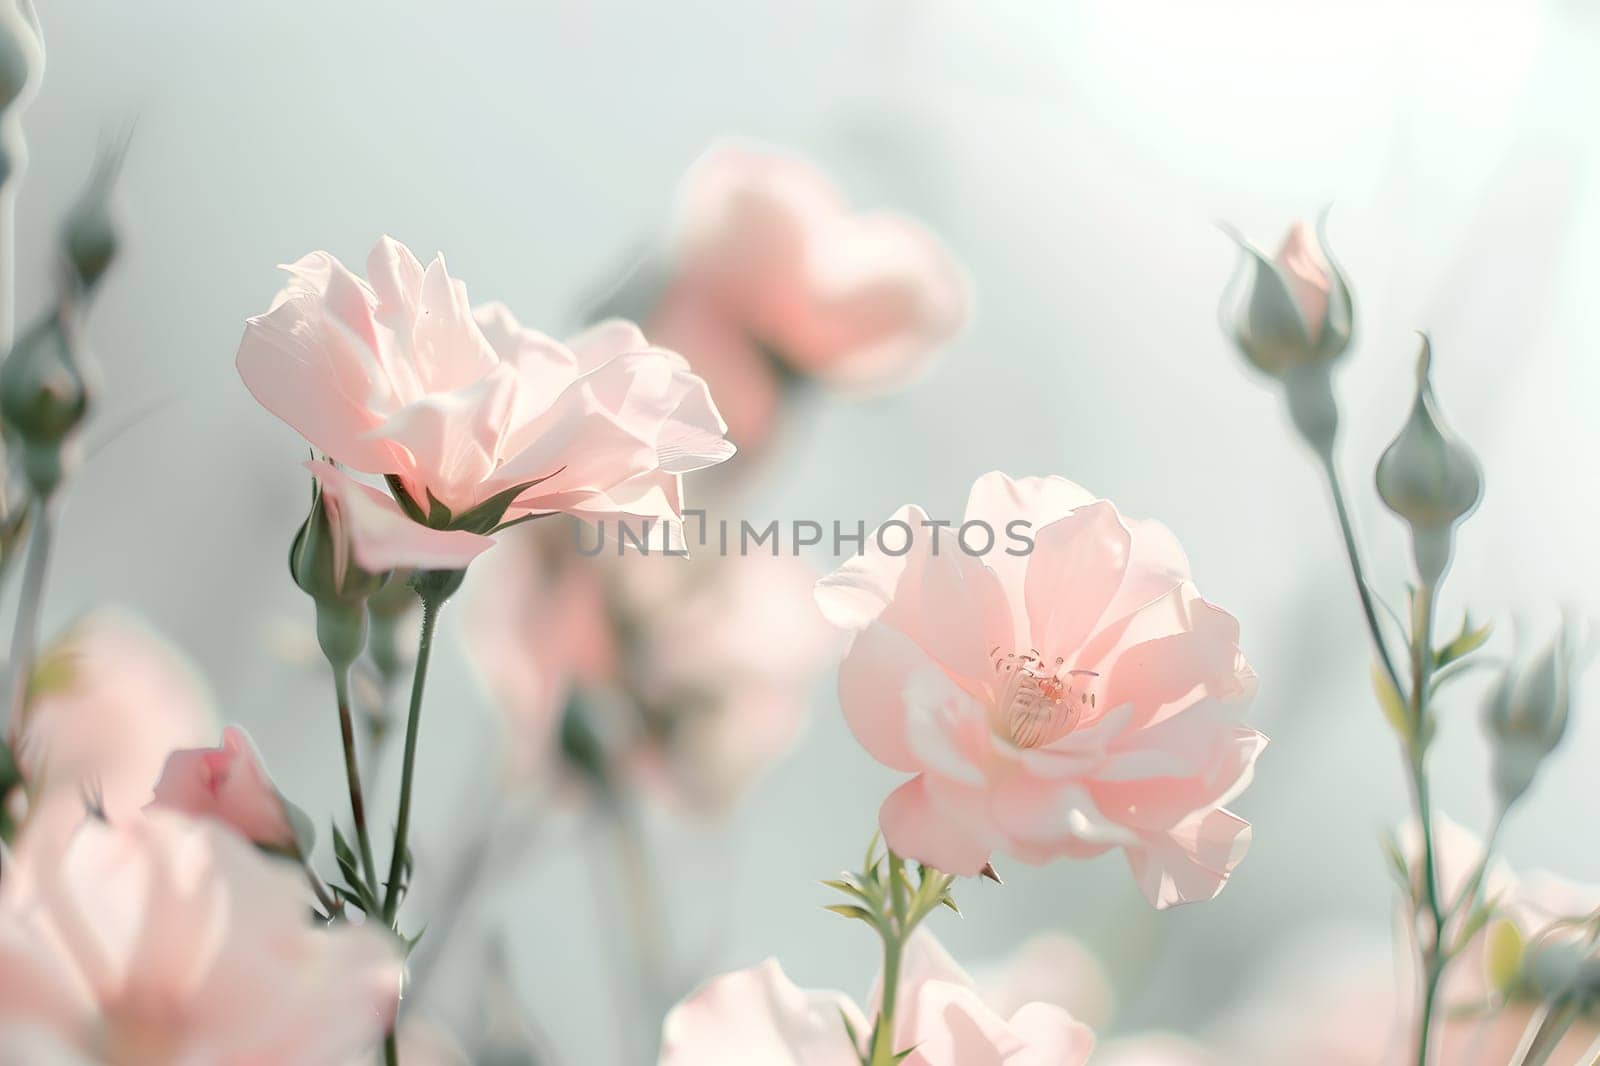 A beautiful display of pink flowers belonging to the Rose family is flourishing in a field, showcasing the delicate petals of flowering plants in shades of peach and pink